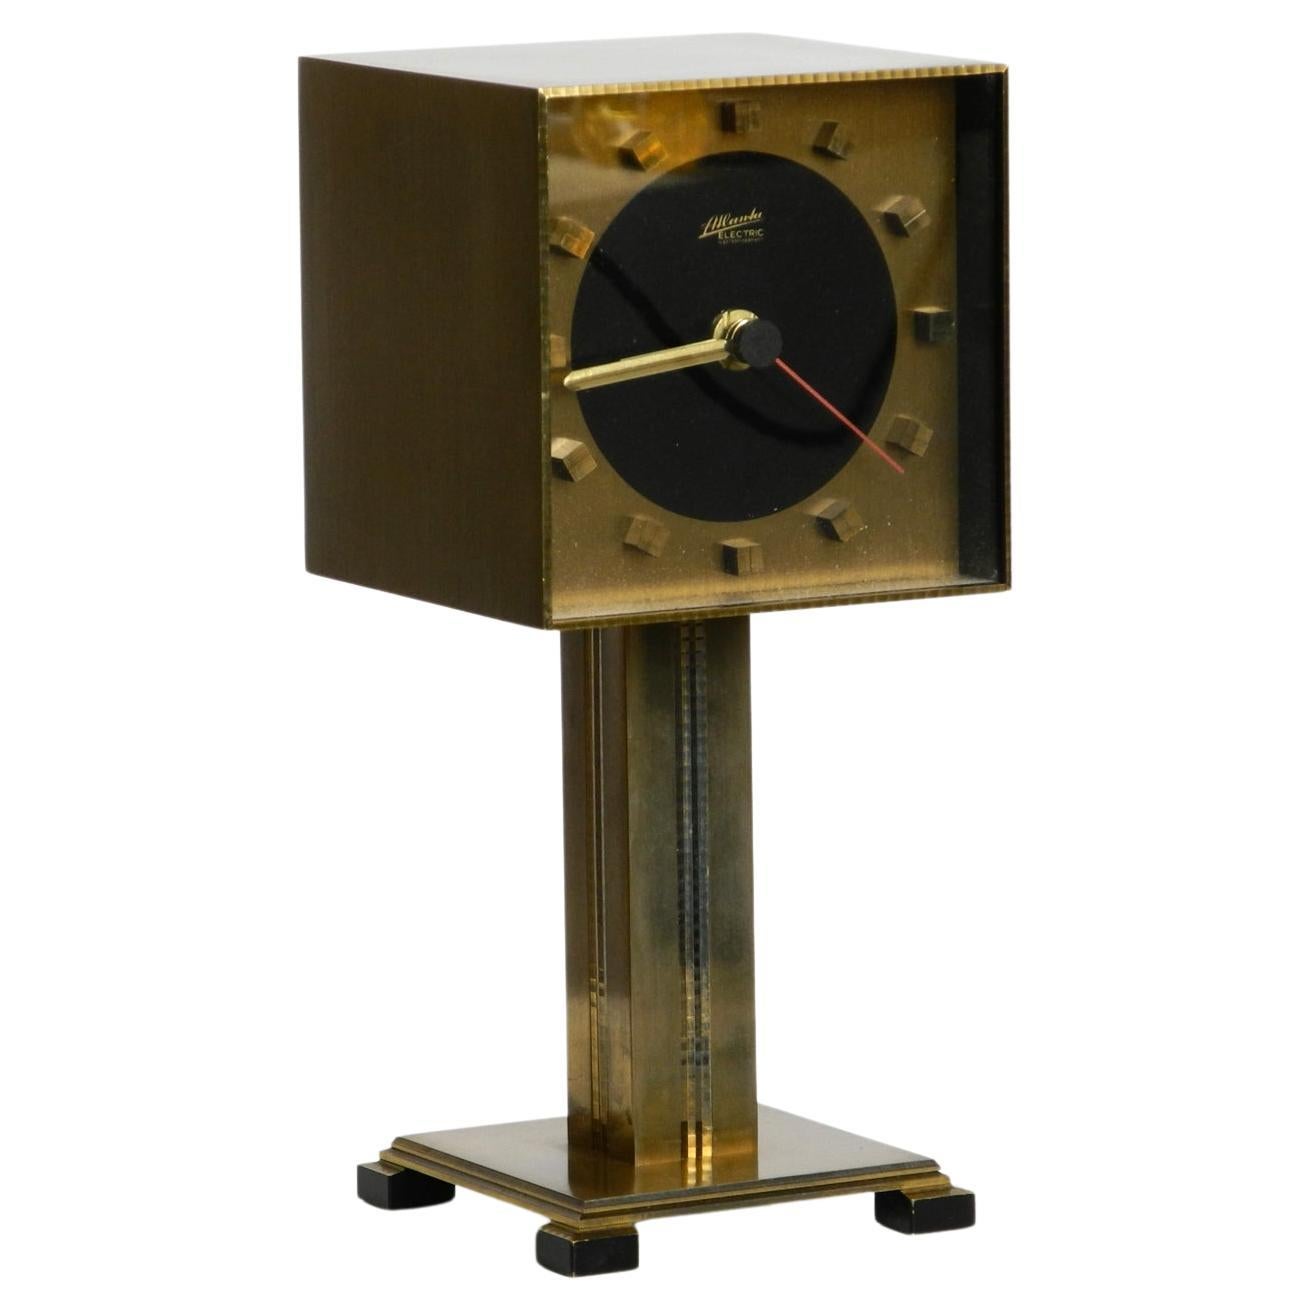 Very rare fancy 1960s brass table clock by Atlanta Electric Germany